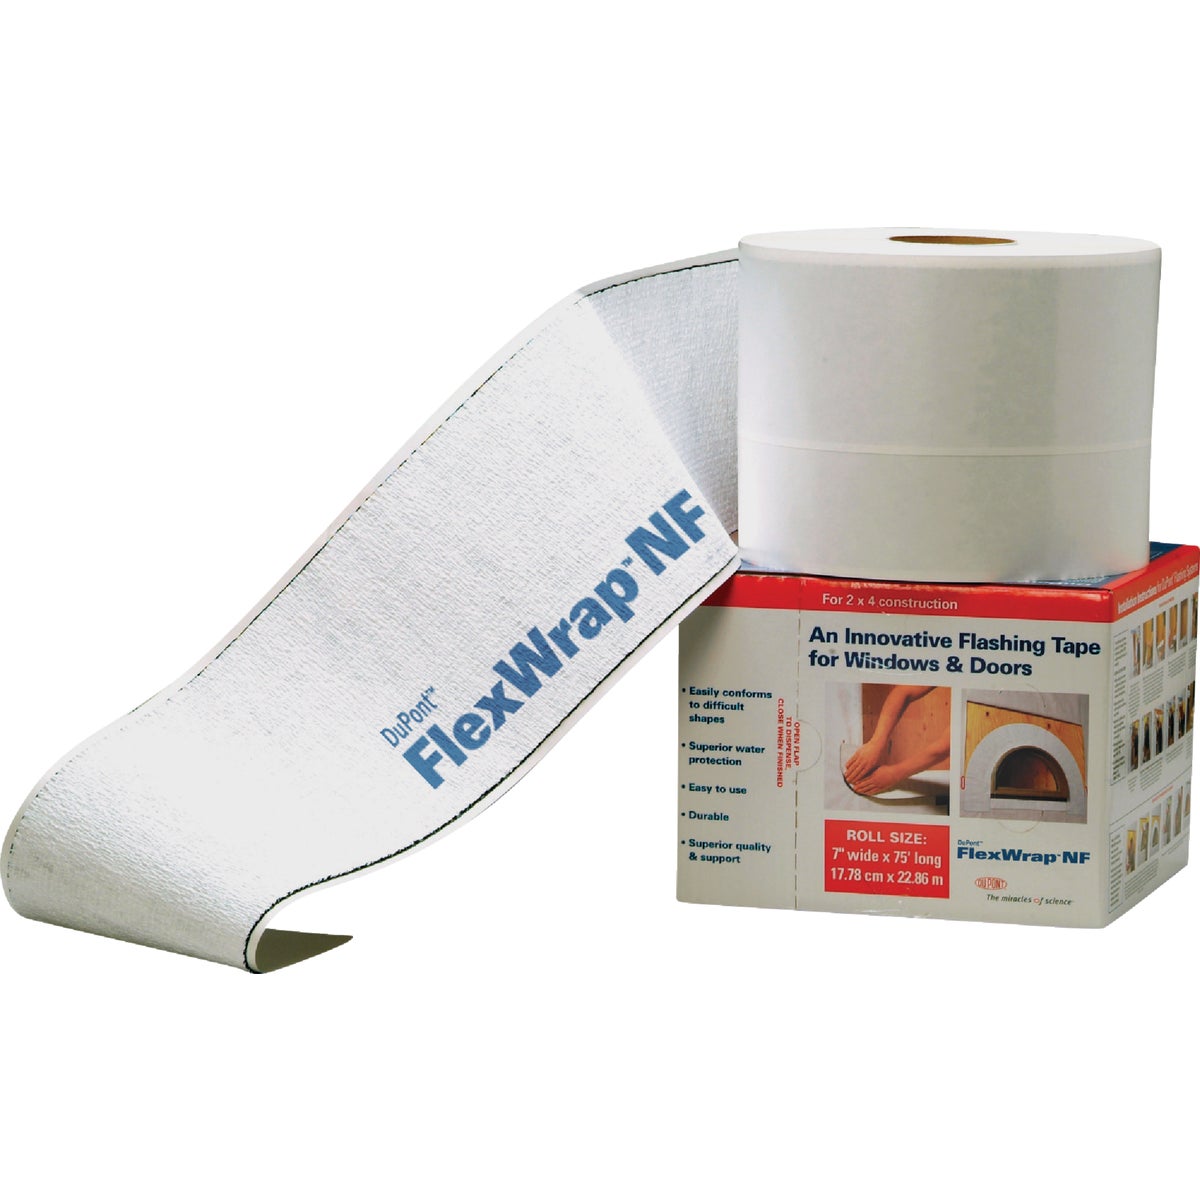 Item 107670, DuPont FlexWrap NF is a premium performance, extendable self-adhered 